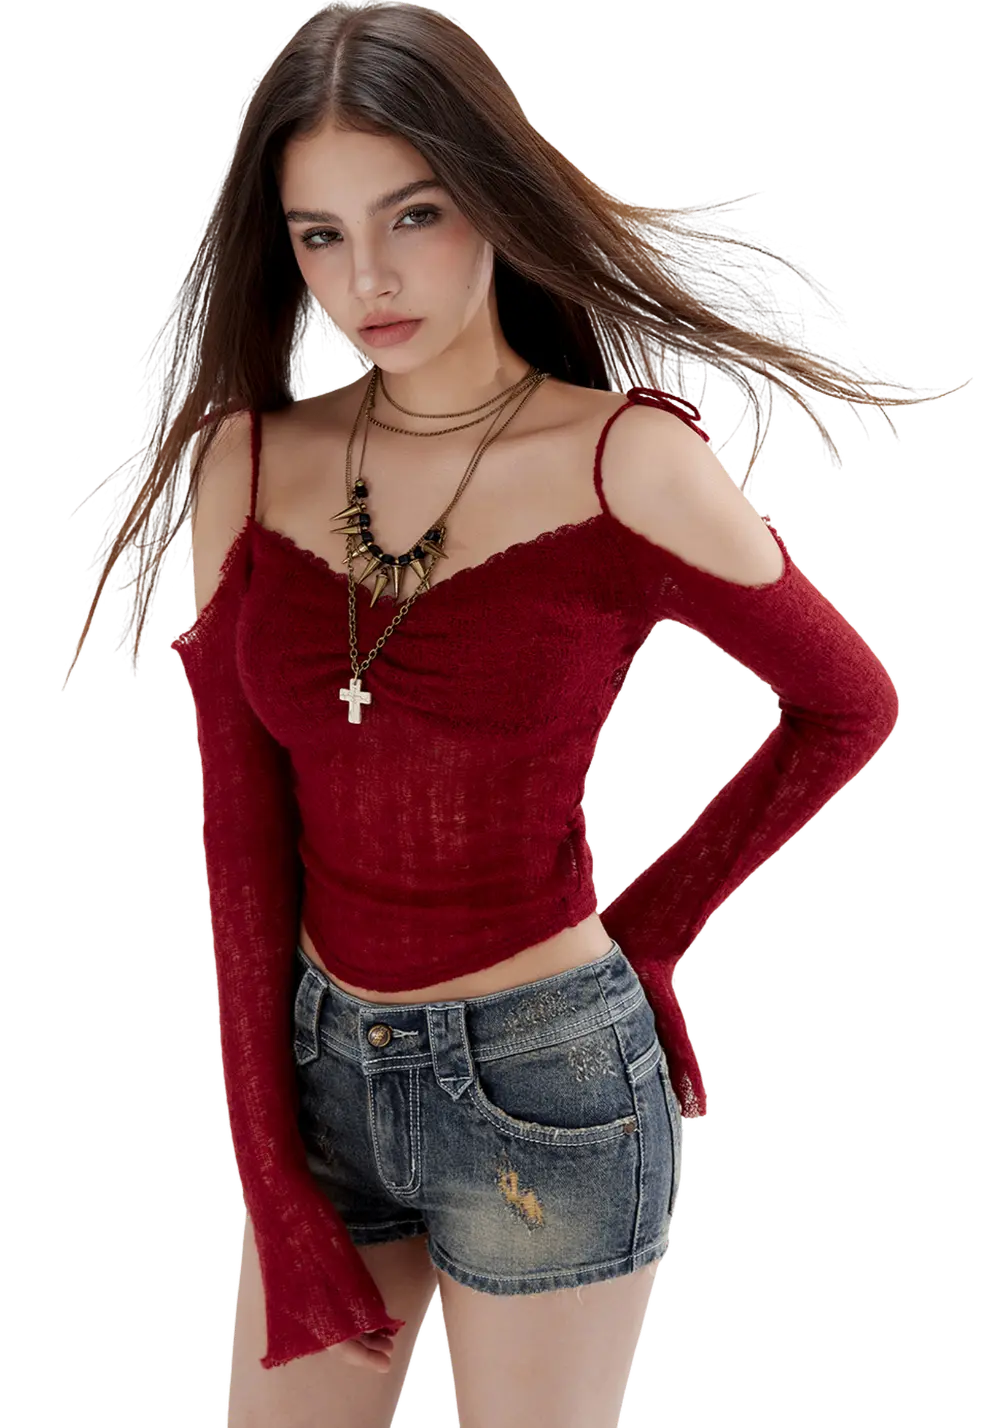 Knitted Hollow Top - PSYLOS 1, Knitted Hollow Top, Sweatshirts, WooHa, PSYLOS 1